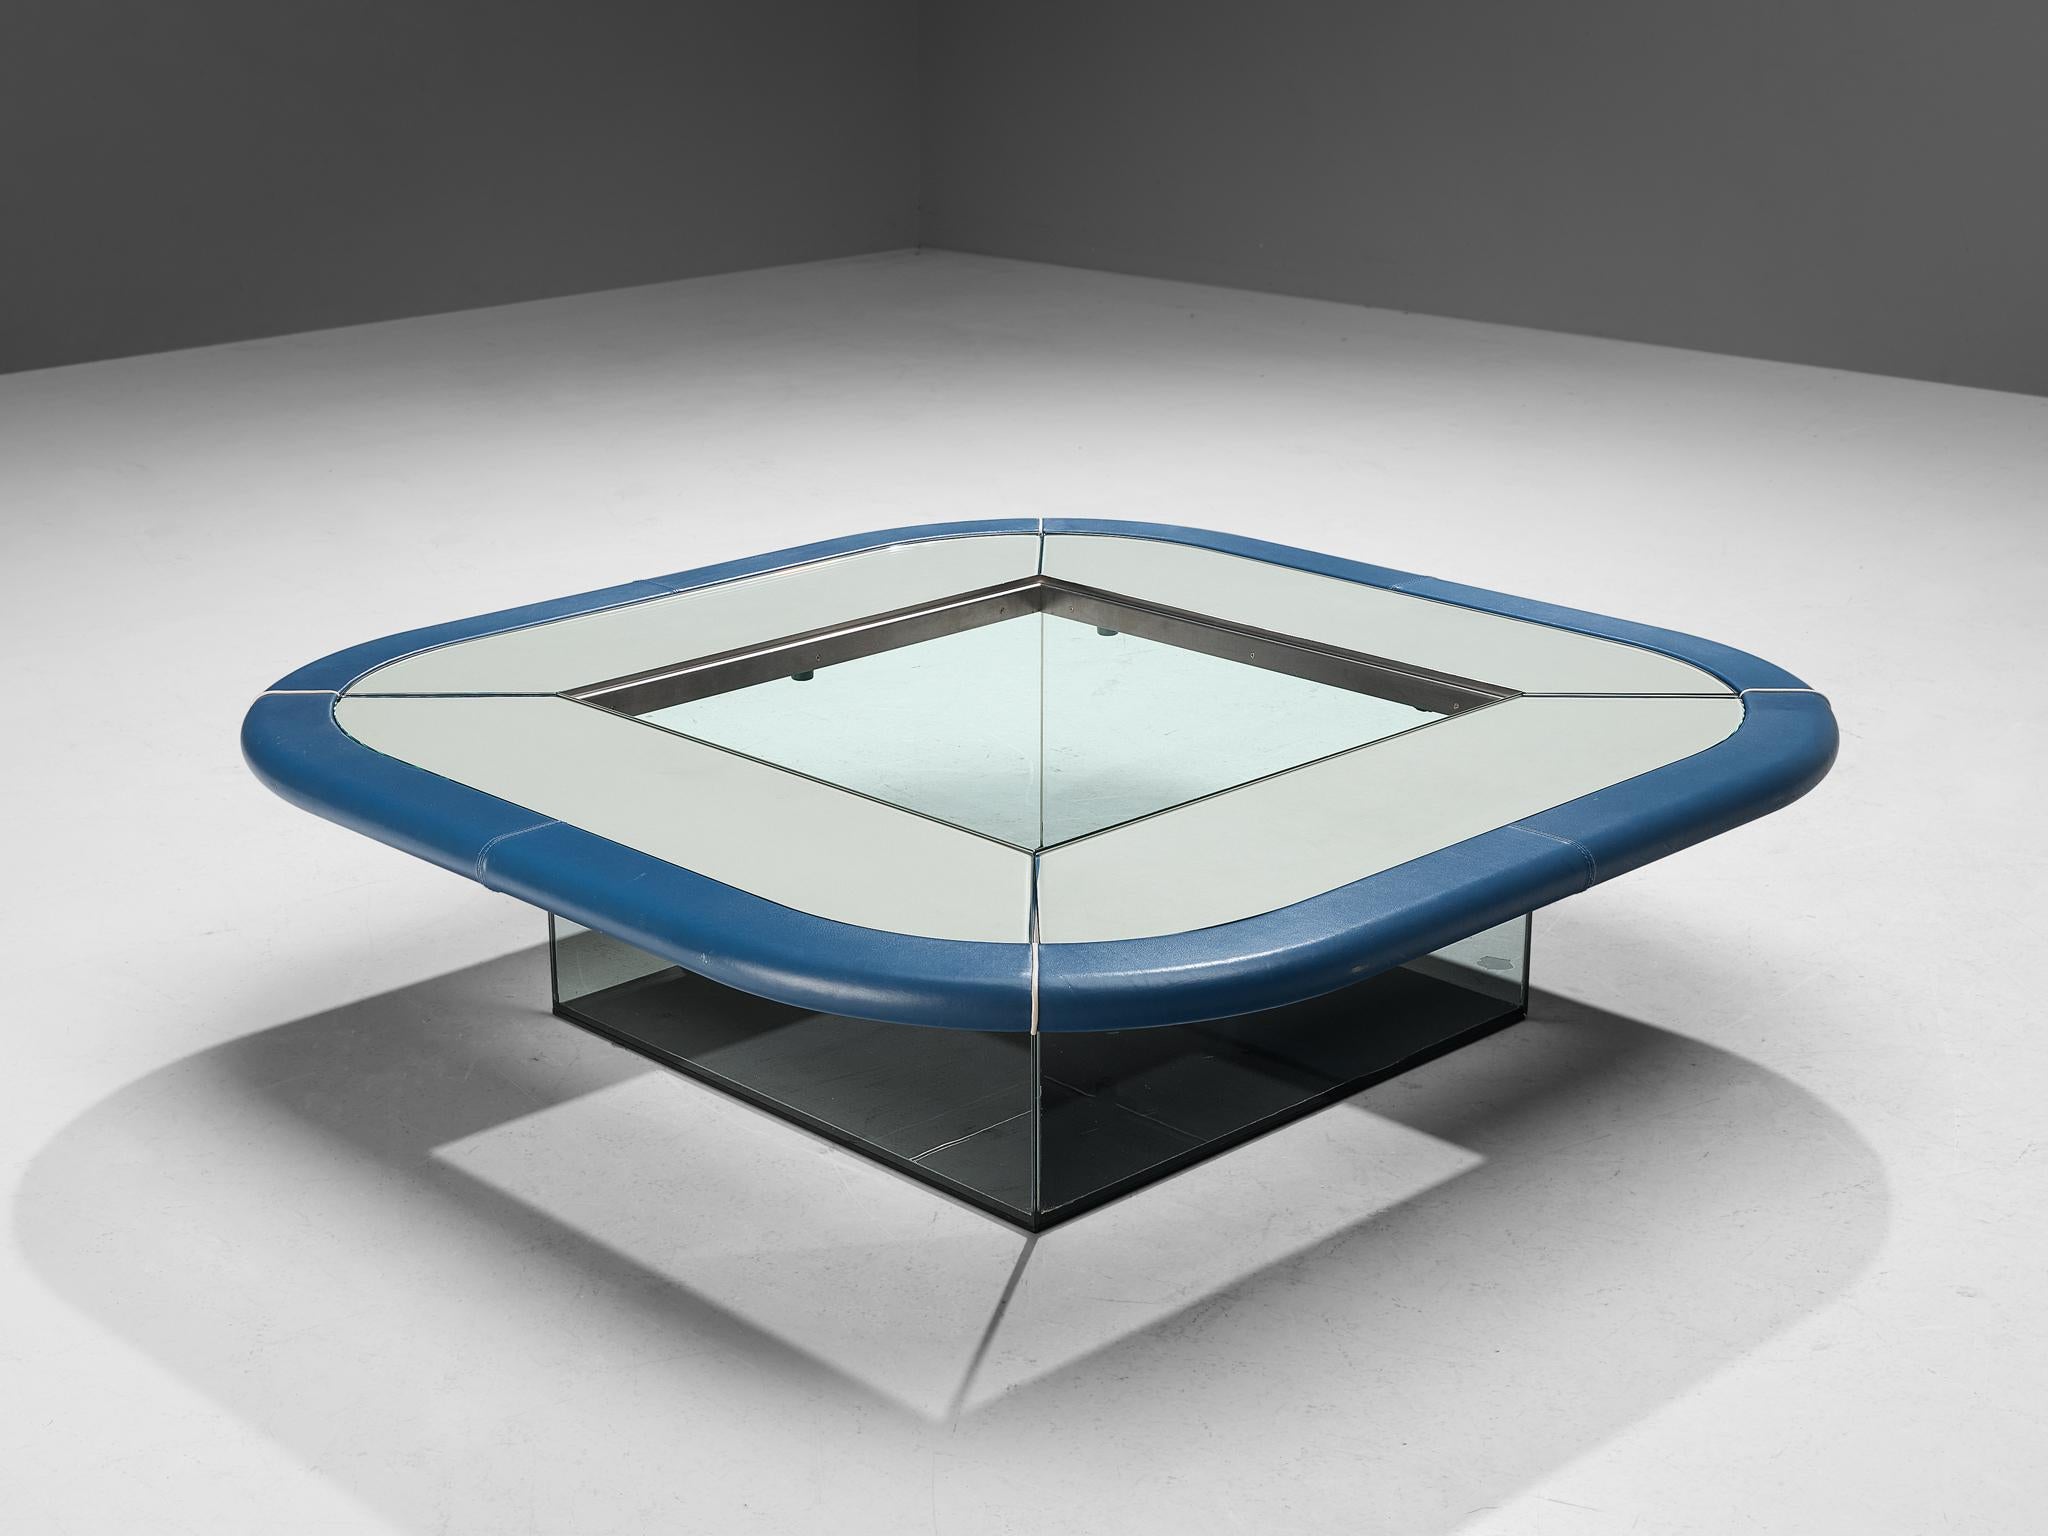 Carlo Bartoli for Rossi di Albizzate, 'Bogo' coffee table, leather, glass, aluminum, Italy, 1976

A postmodern design by Italian master of architecture and design Carlo Bartoli (1931-2020) known for his works that are immediately recognisable.